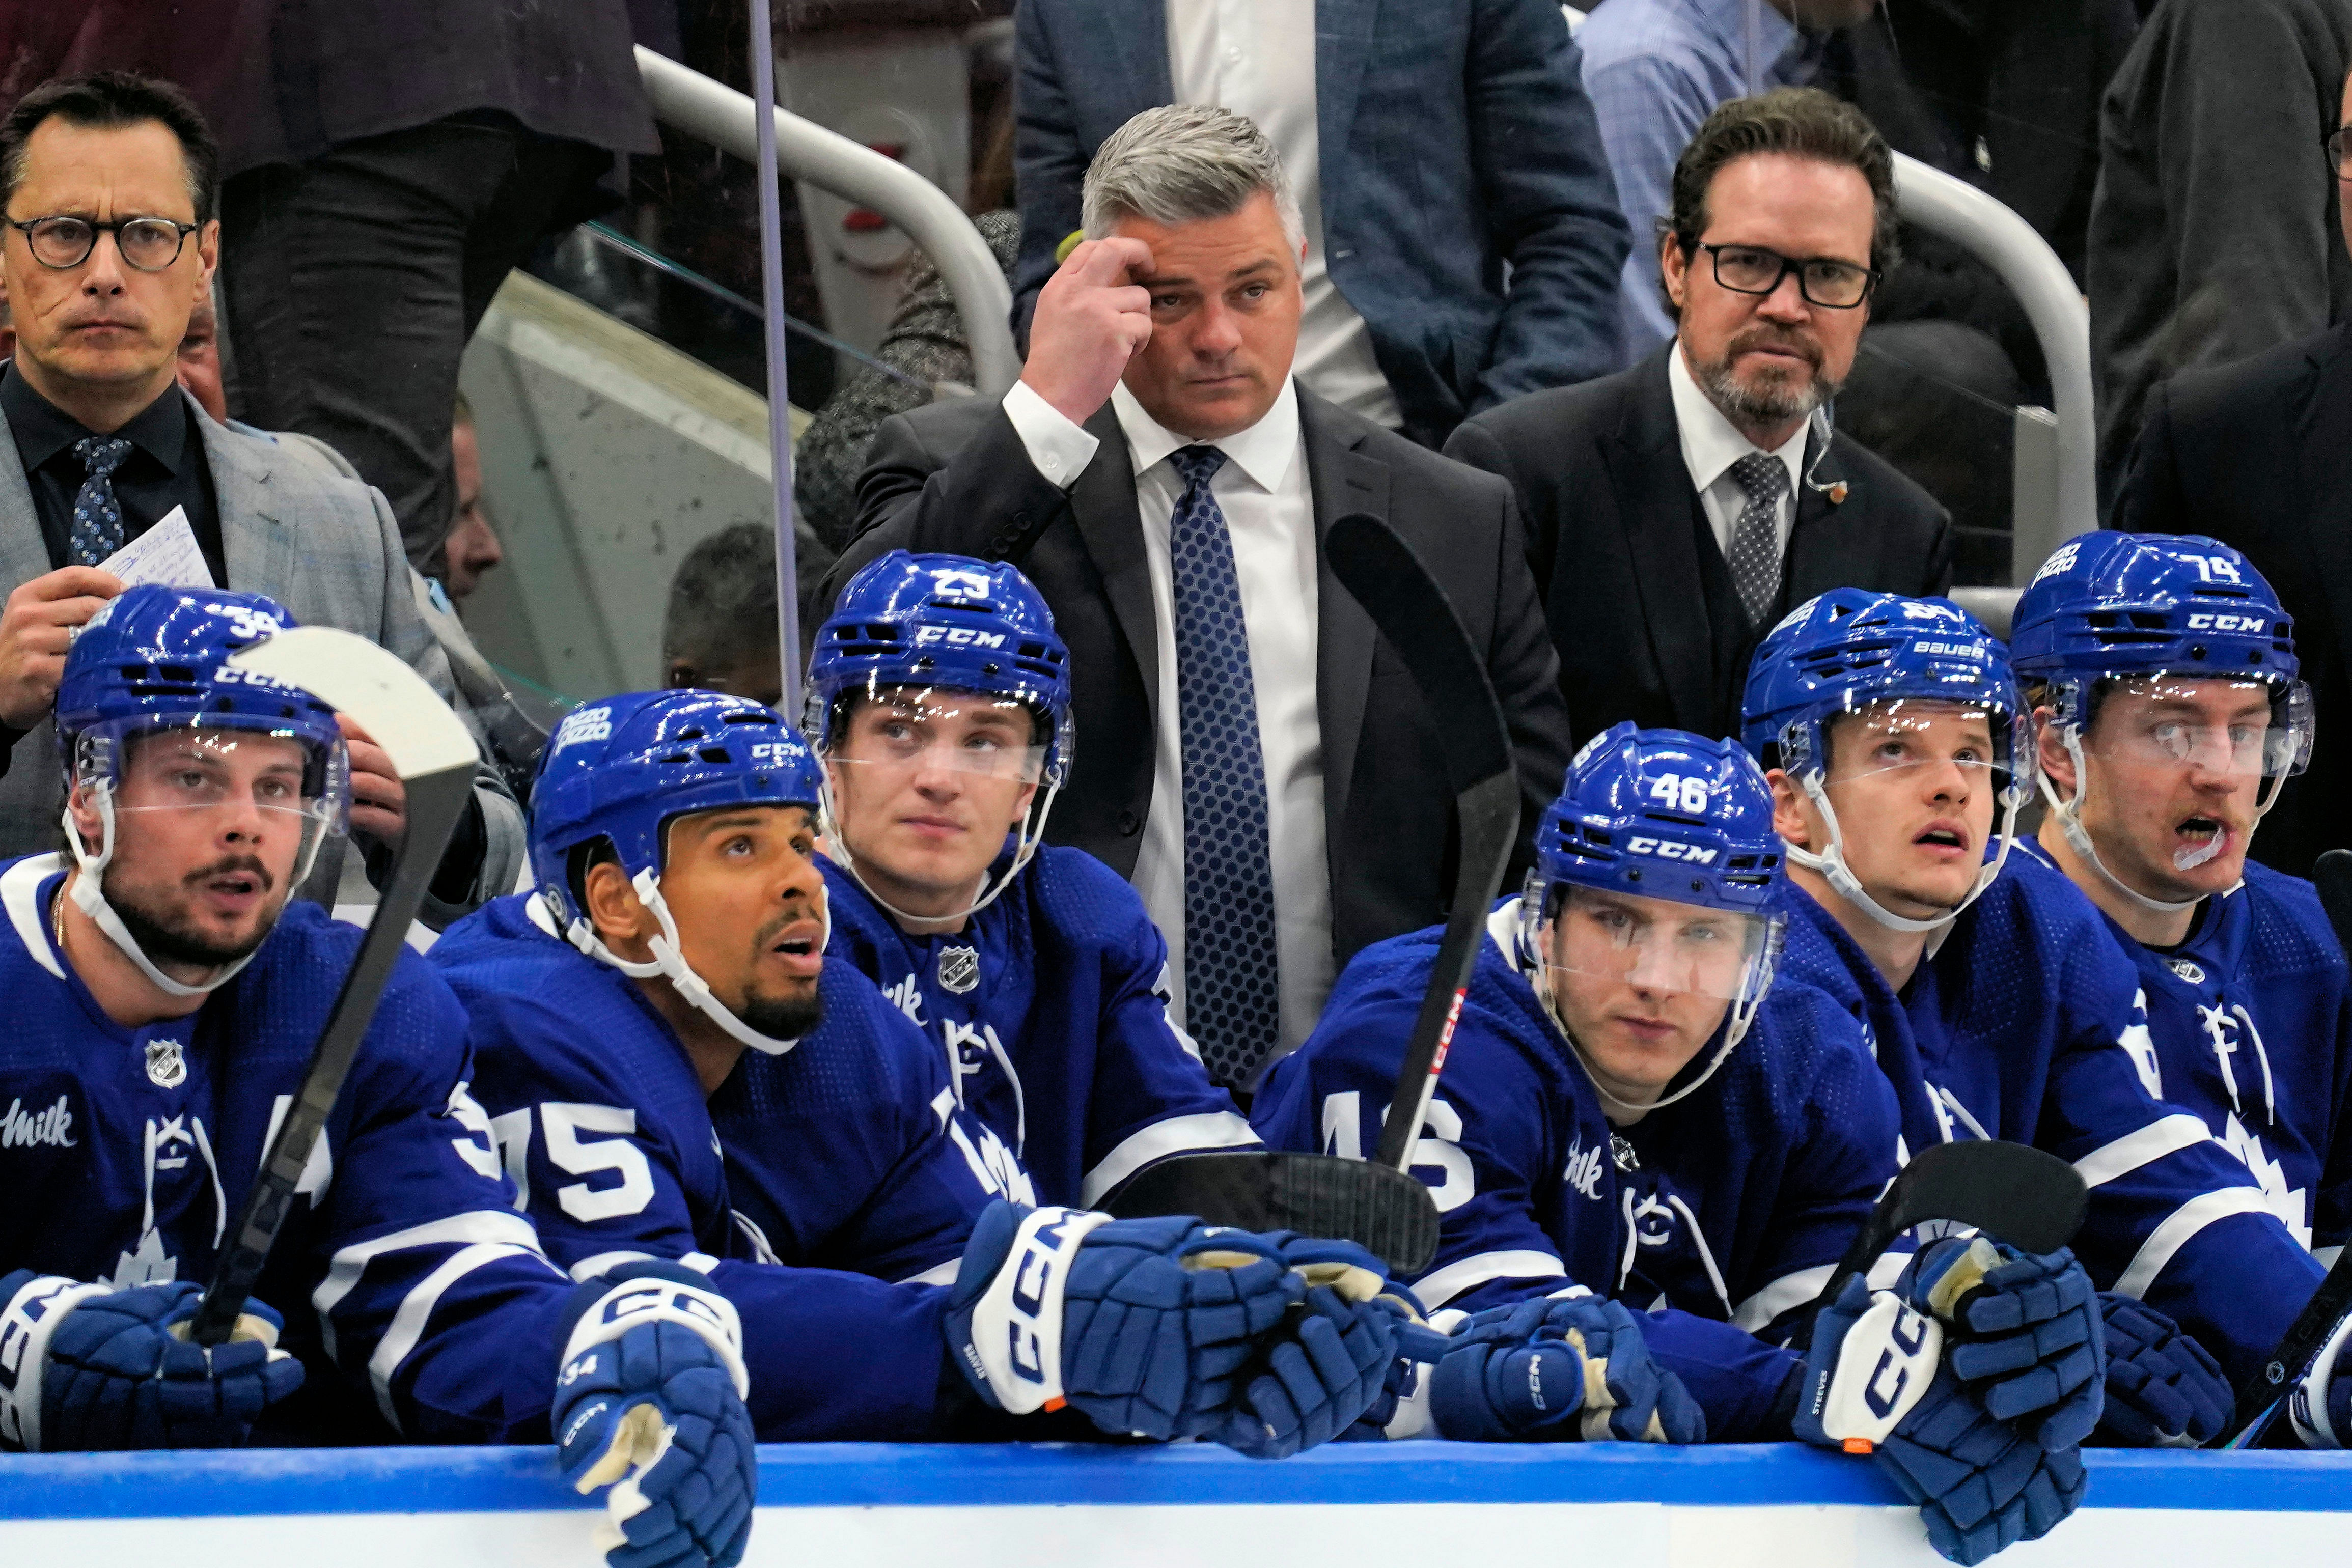 NHL: St. Louis Blues at Toronto Maple Leafs